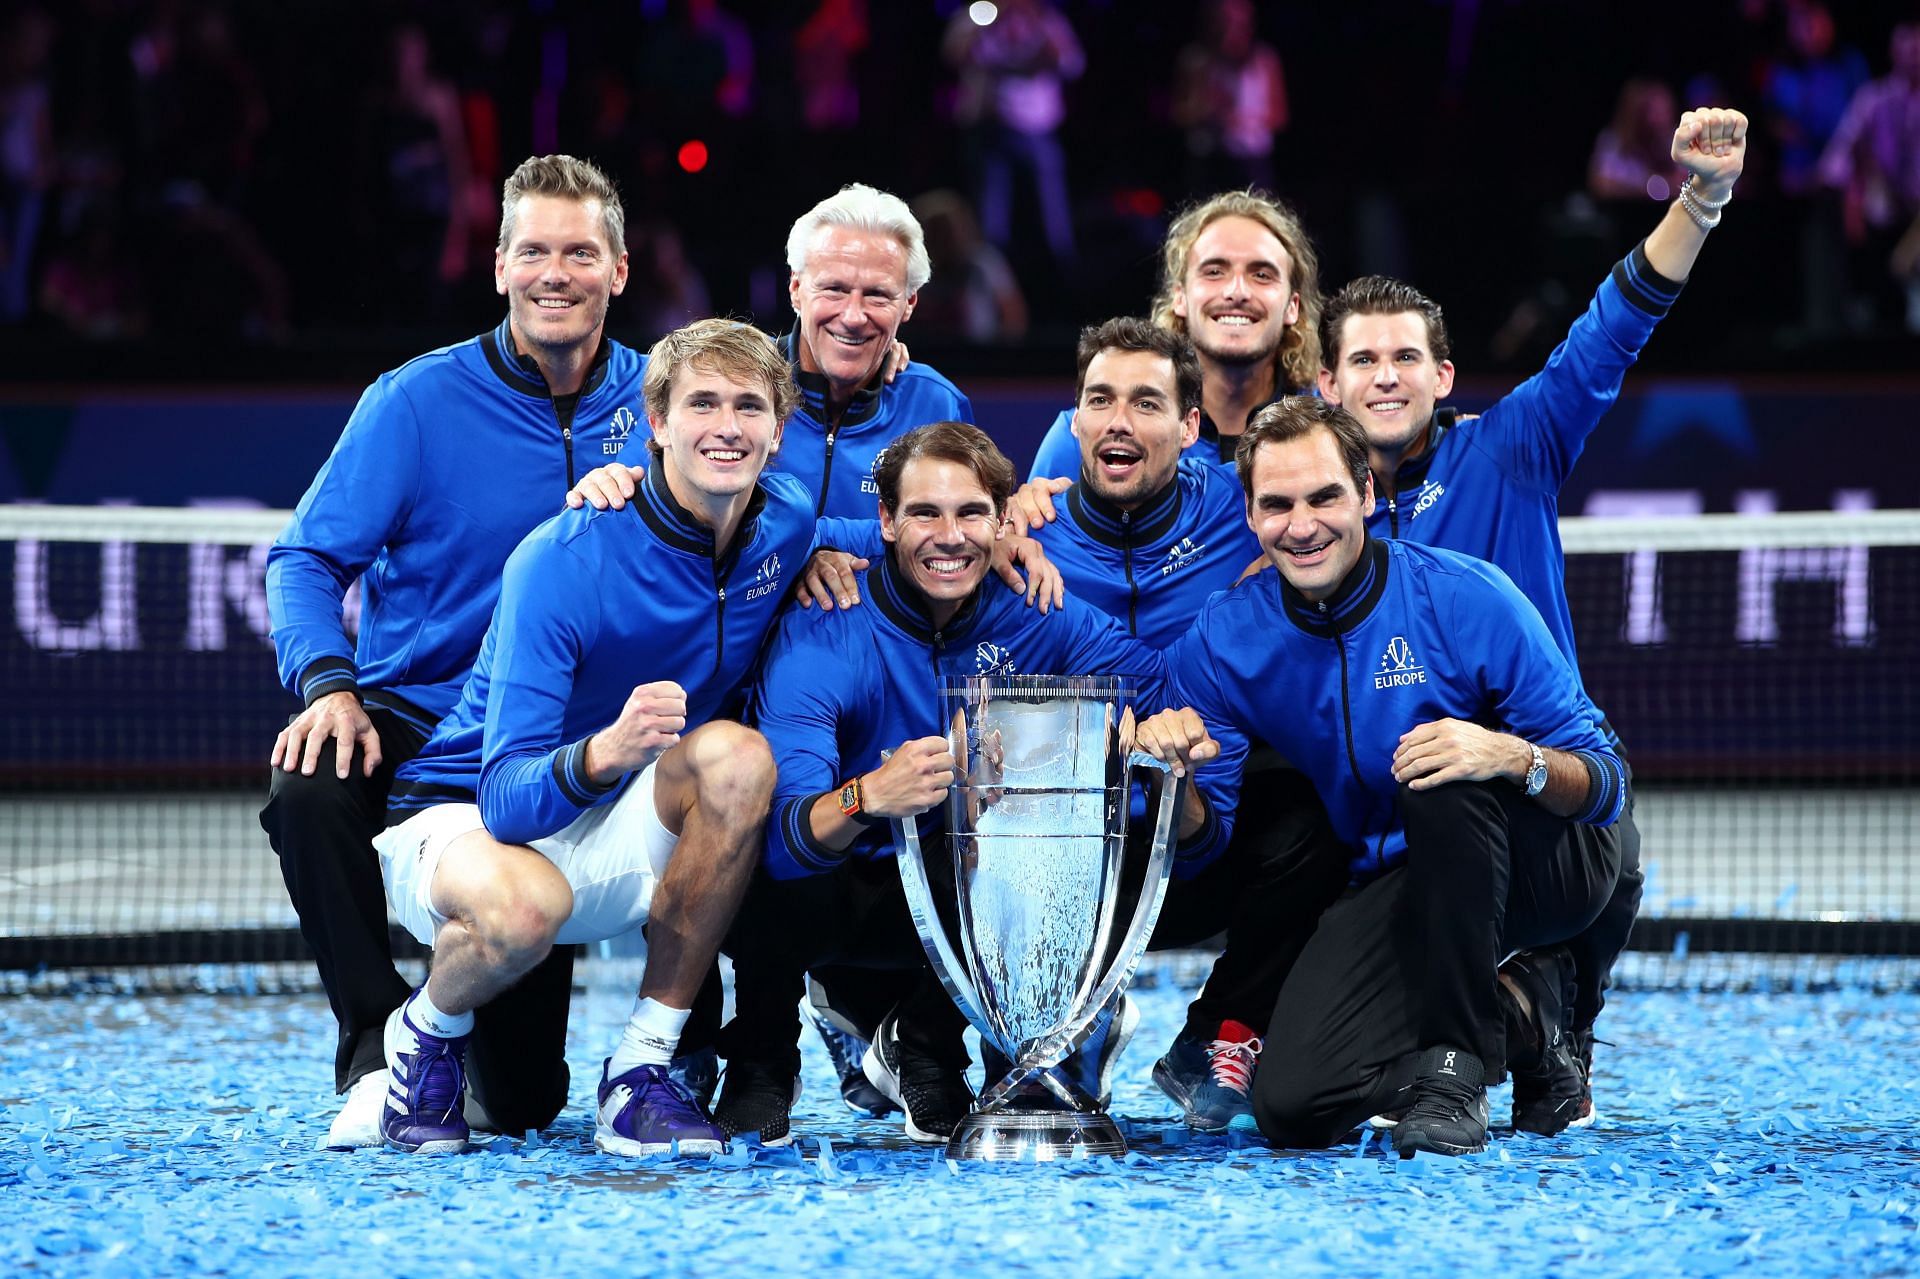 Laver Cup 2022 Where to watch, TV schedule, live streaming details and more